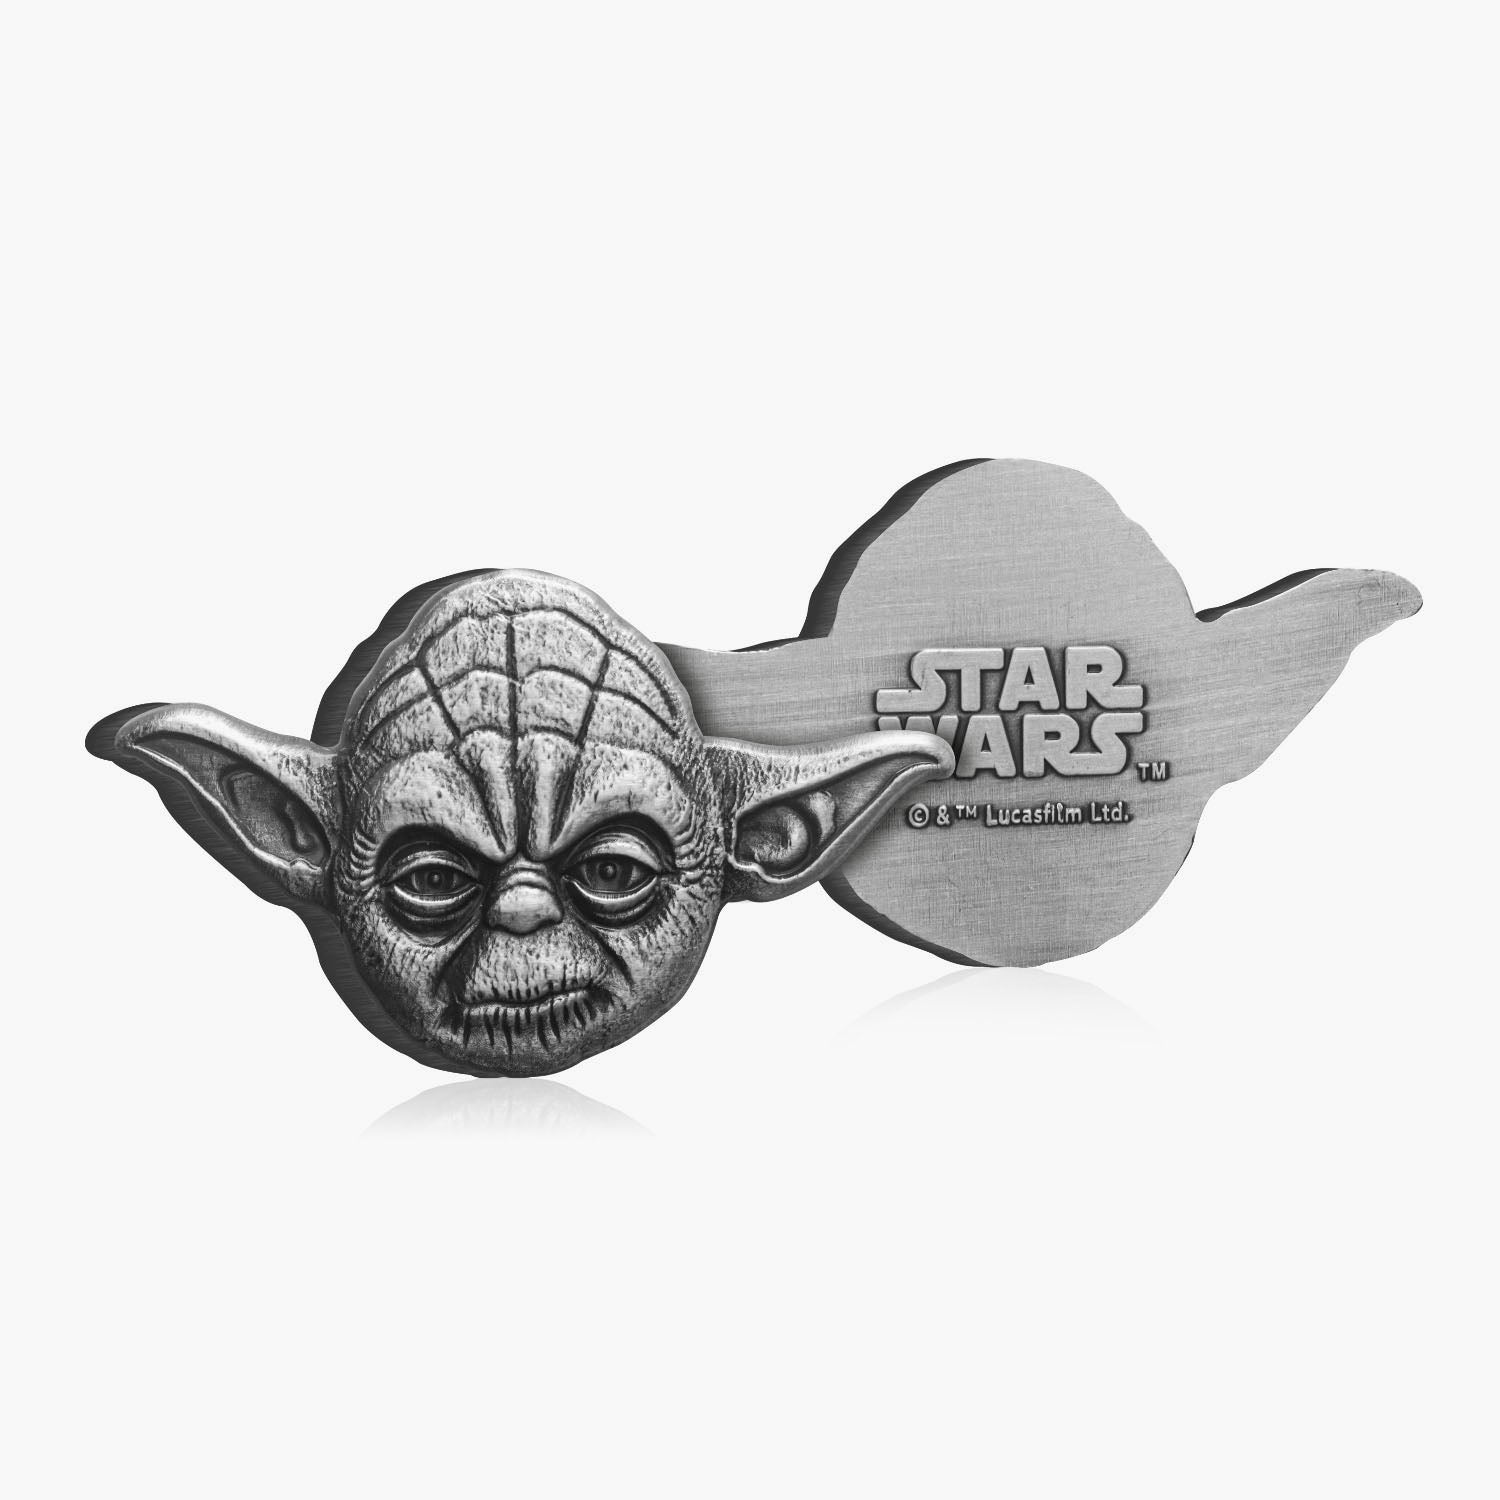 Official Star Wars Yoda Shaped Commemorative